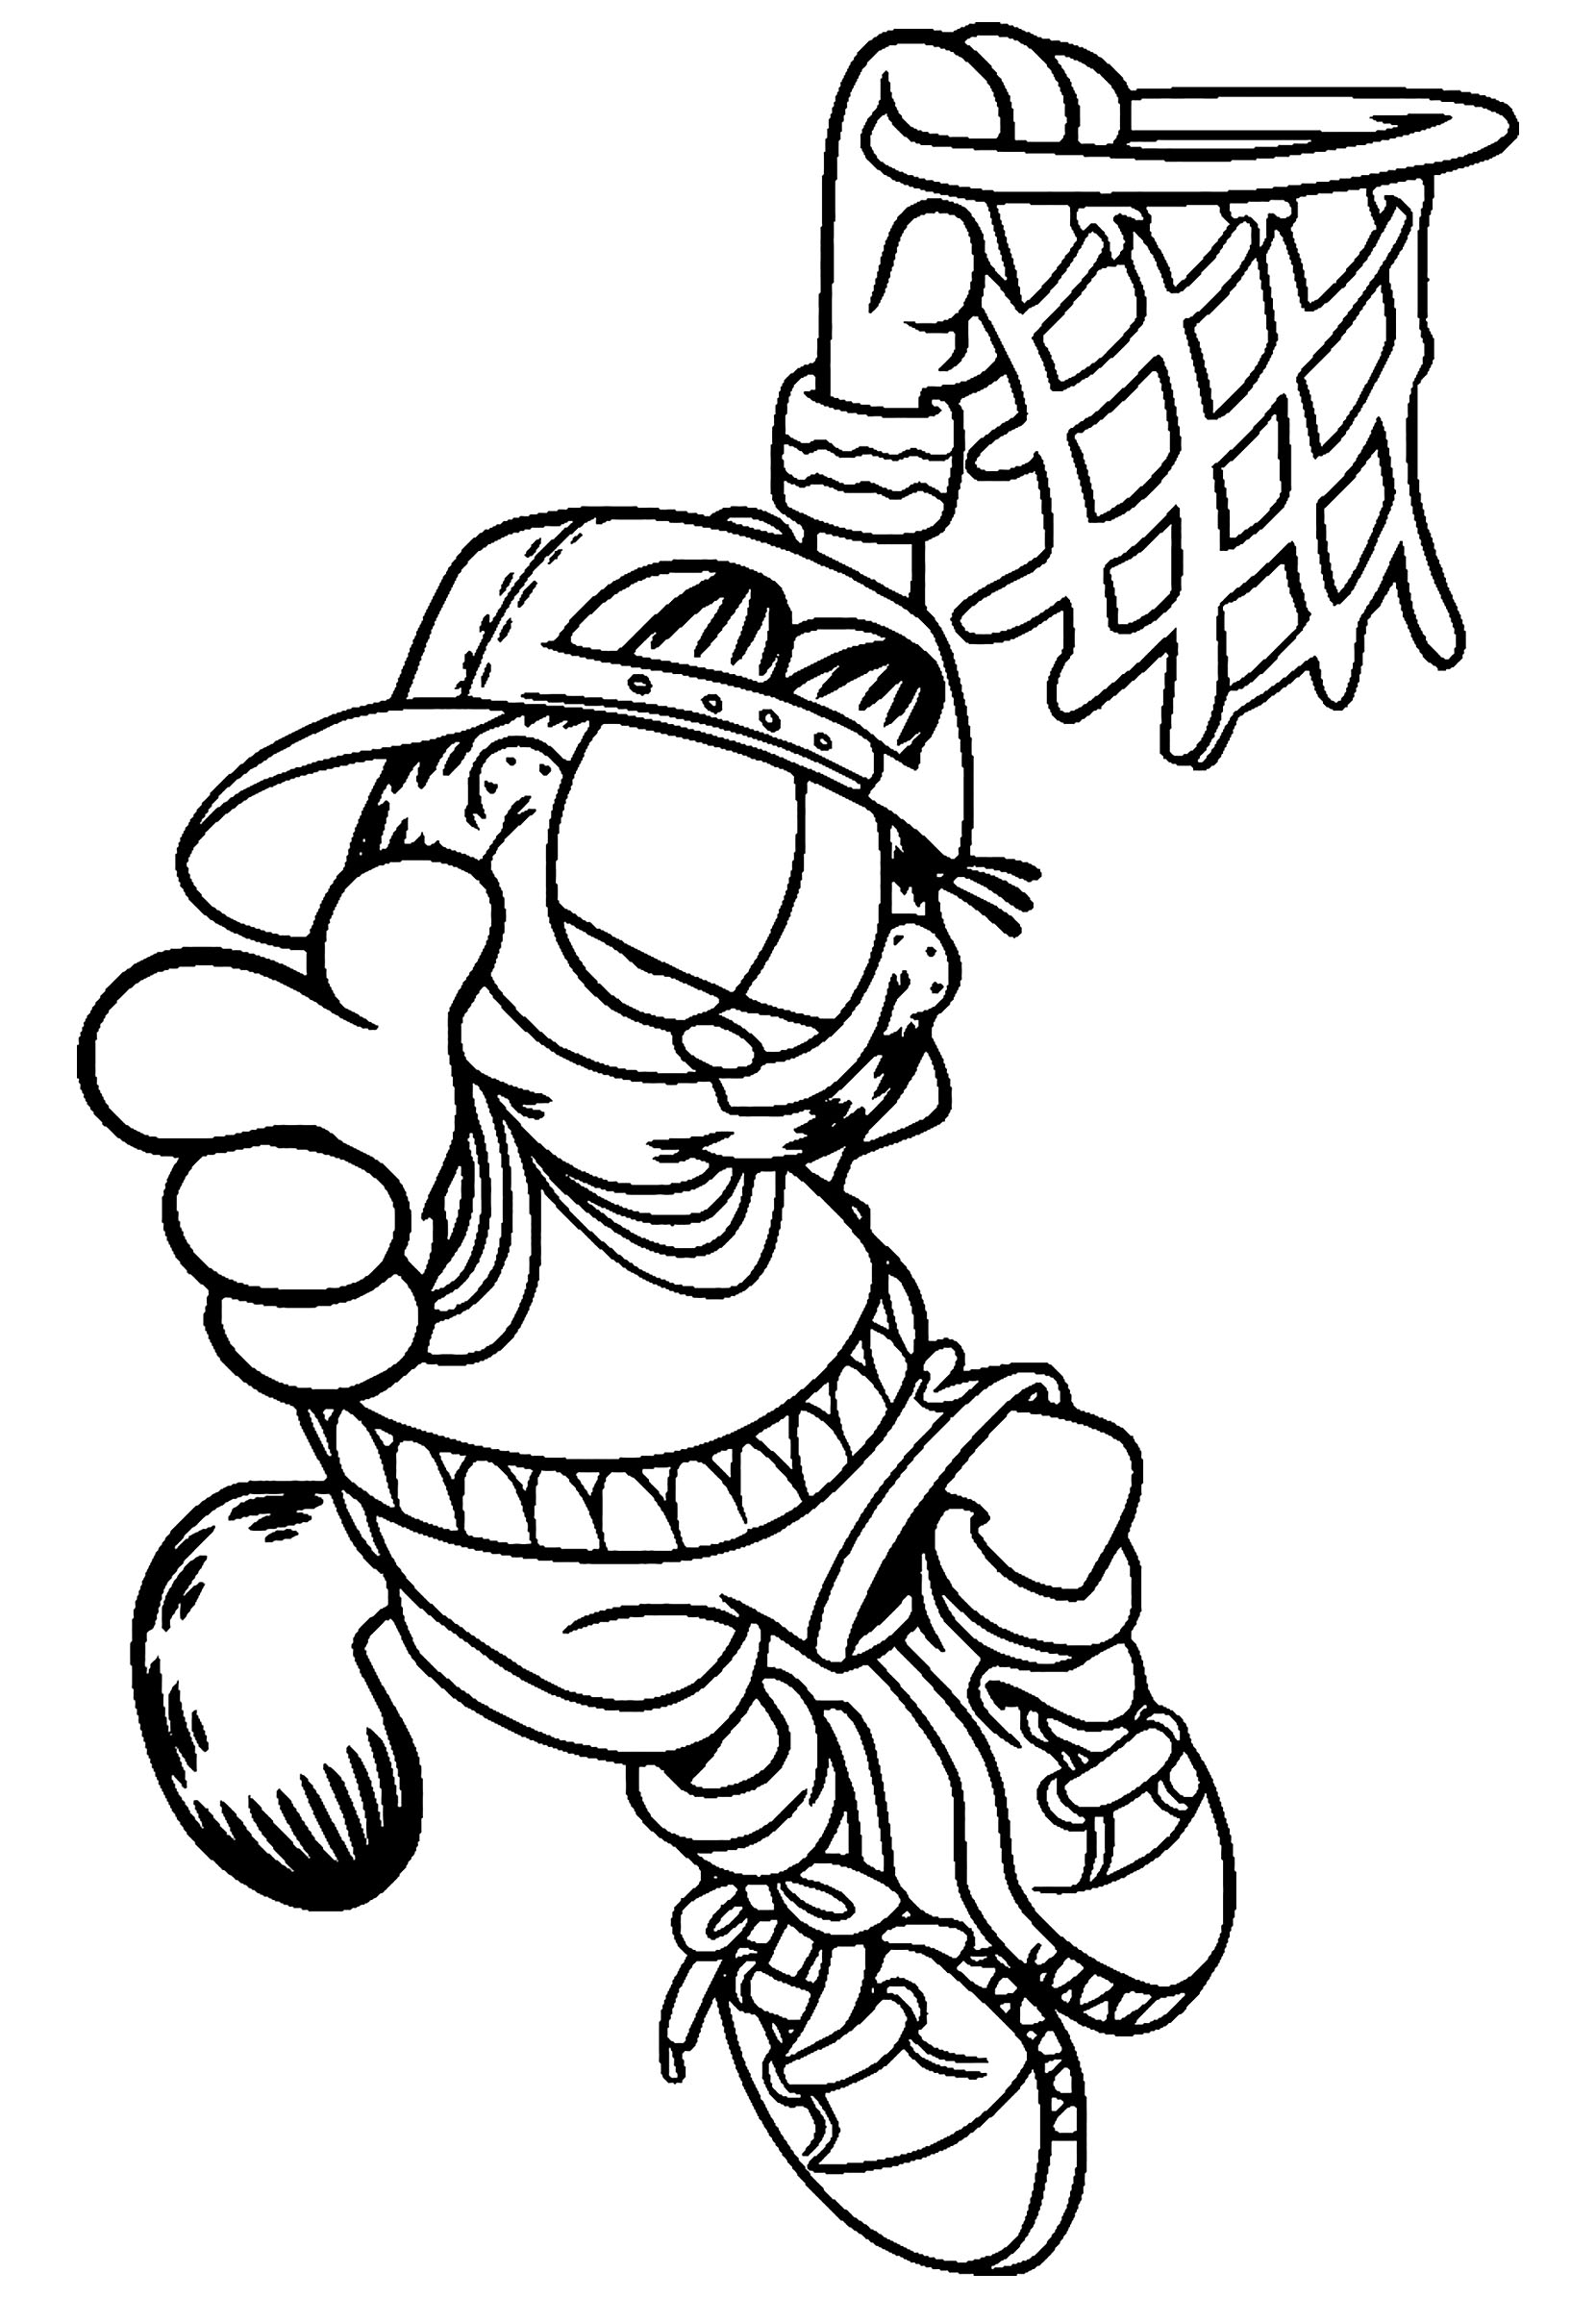 Garfield to download - Garfield Kids Coloring Pages